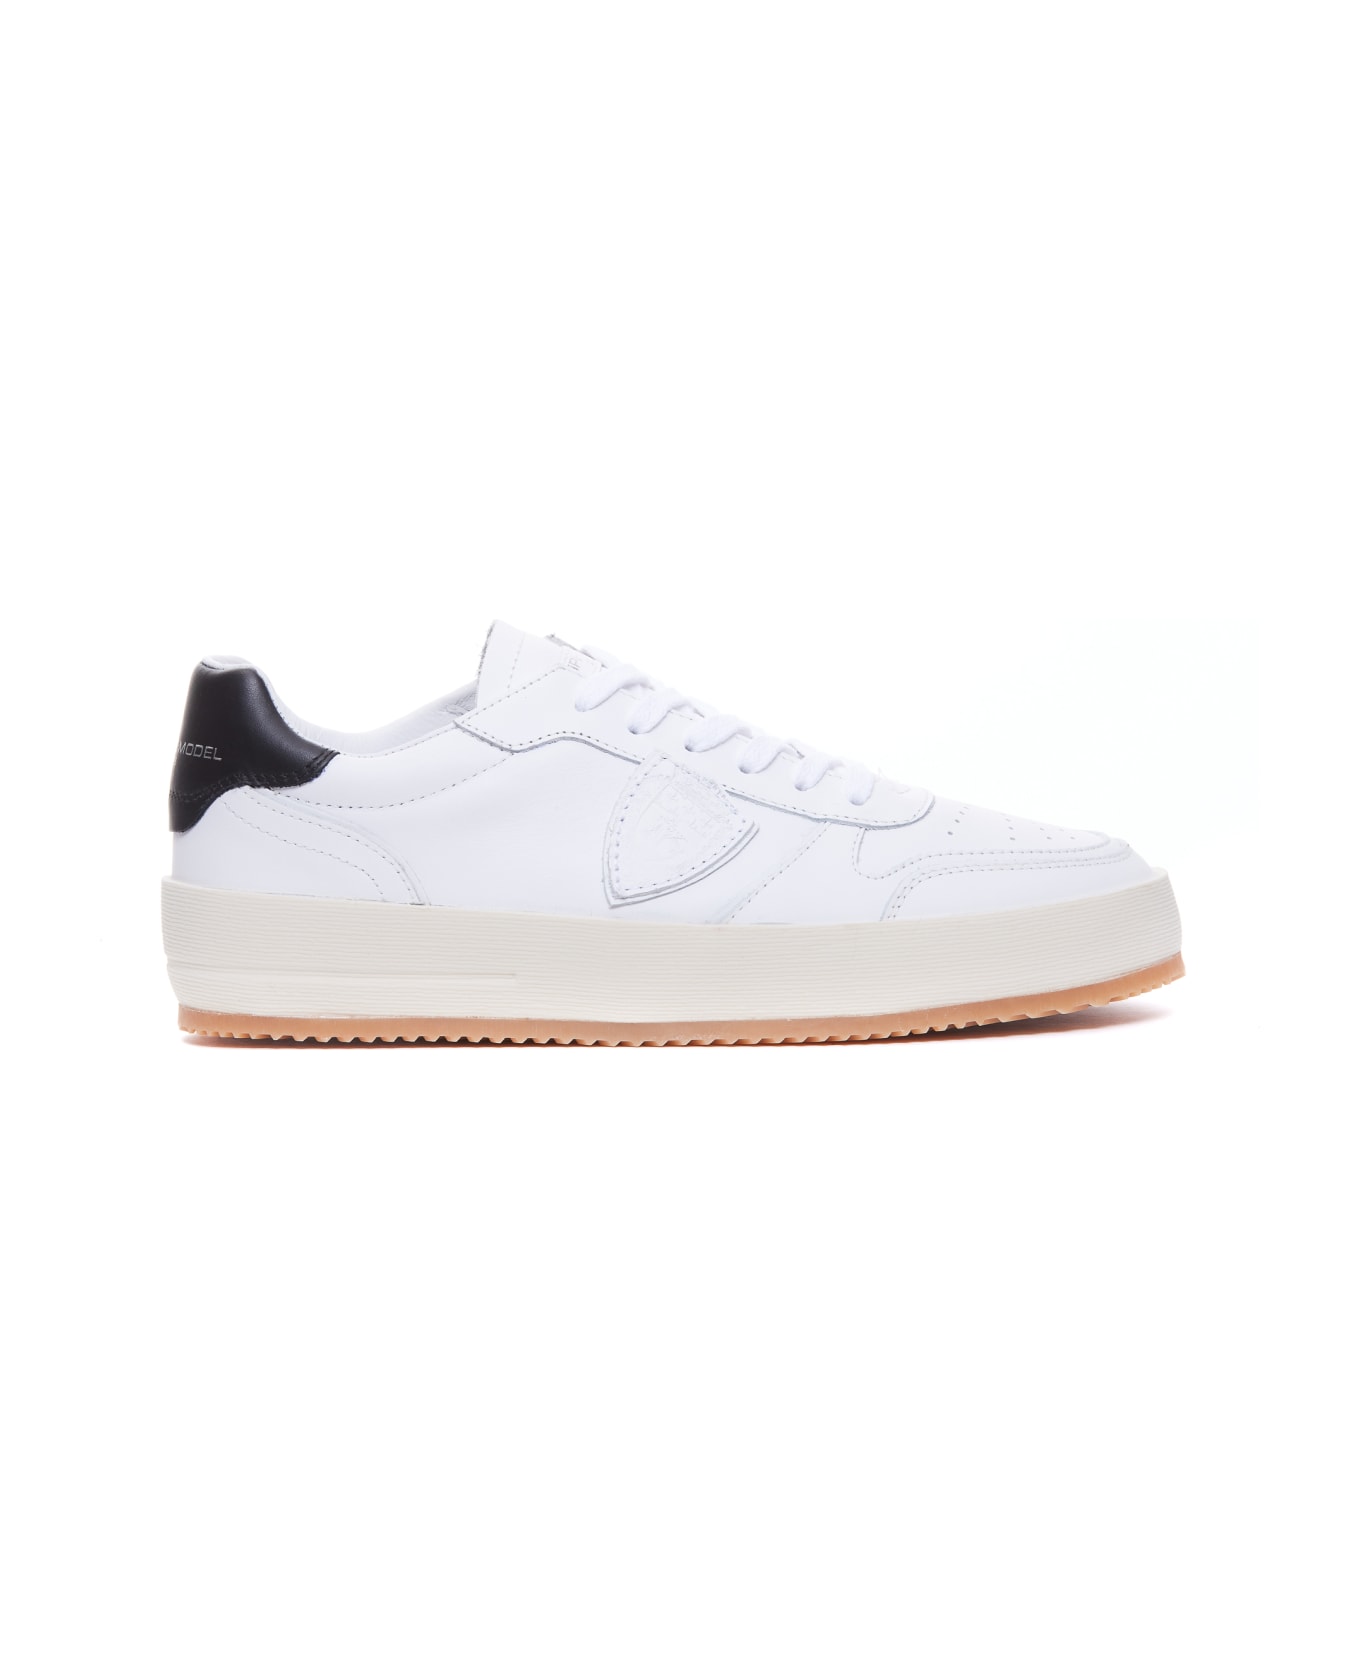 Philippe Model Nice Low Sneakers - WHITE/BLACK